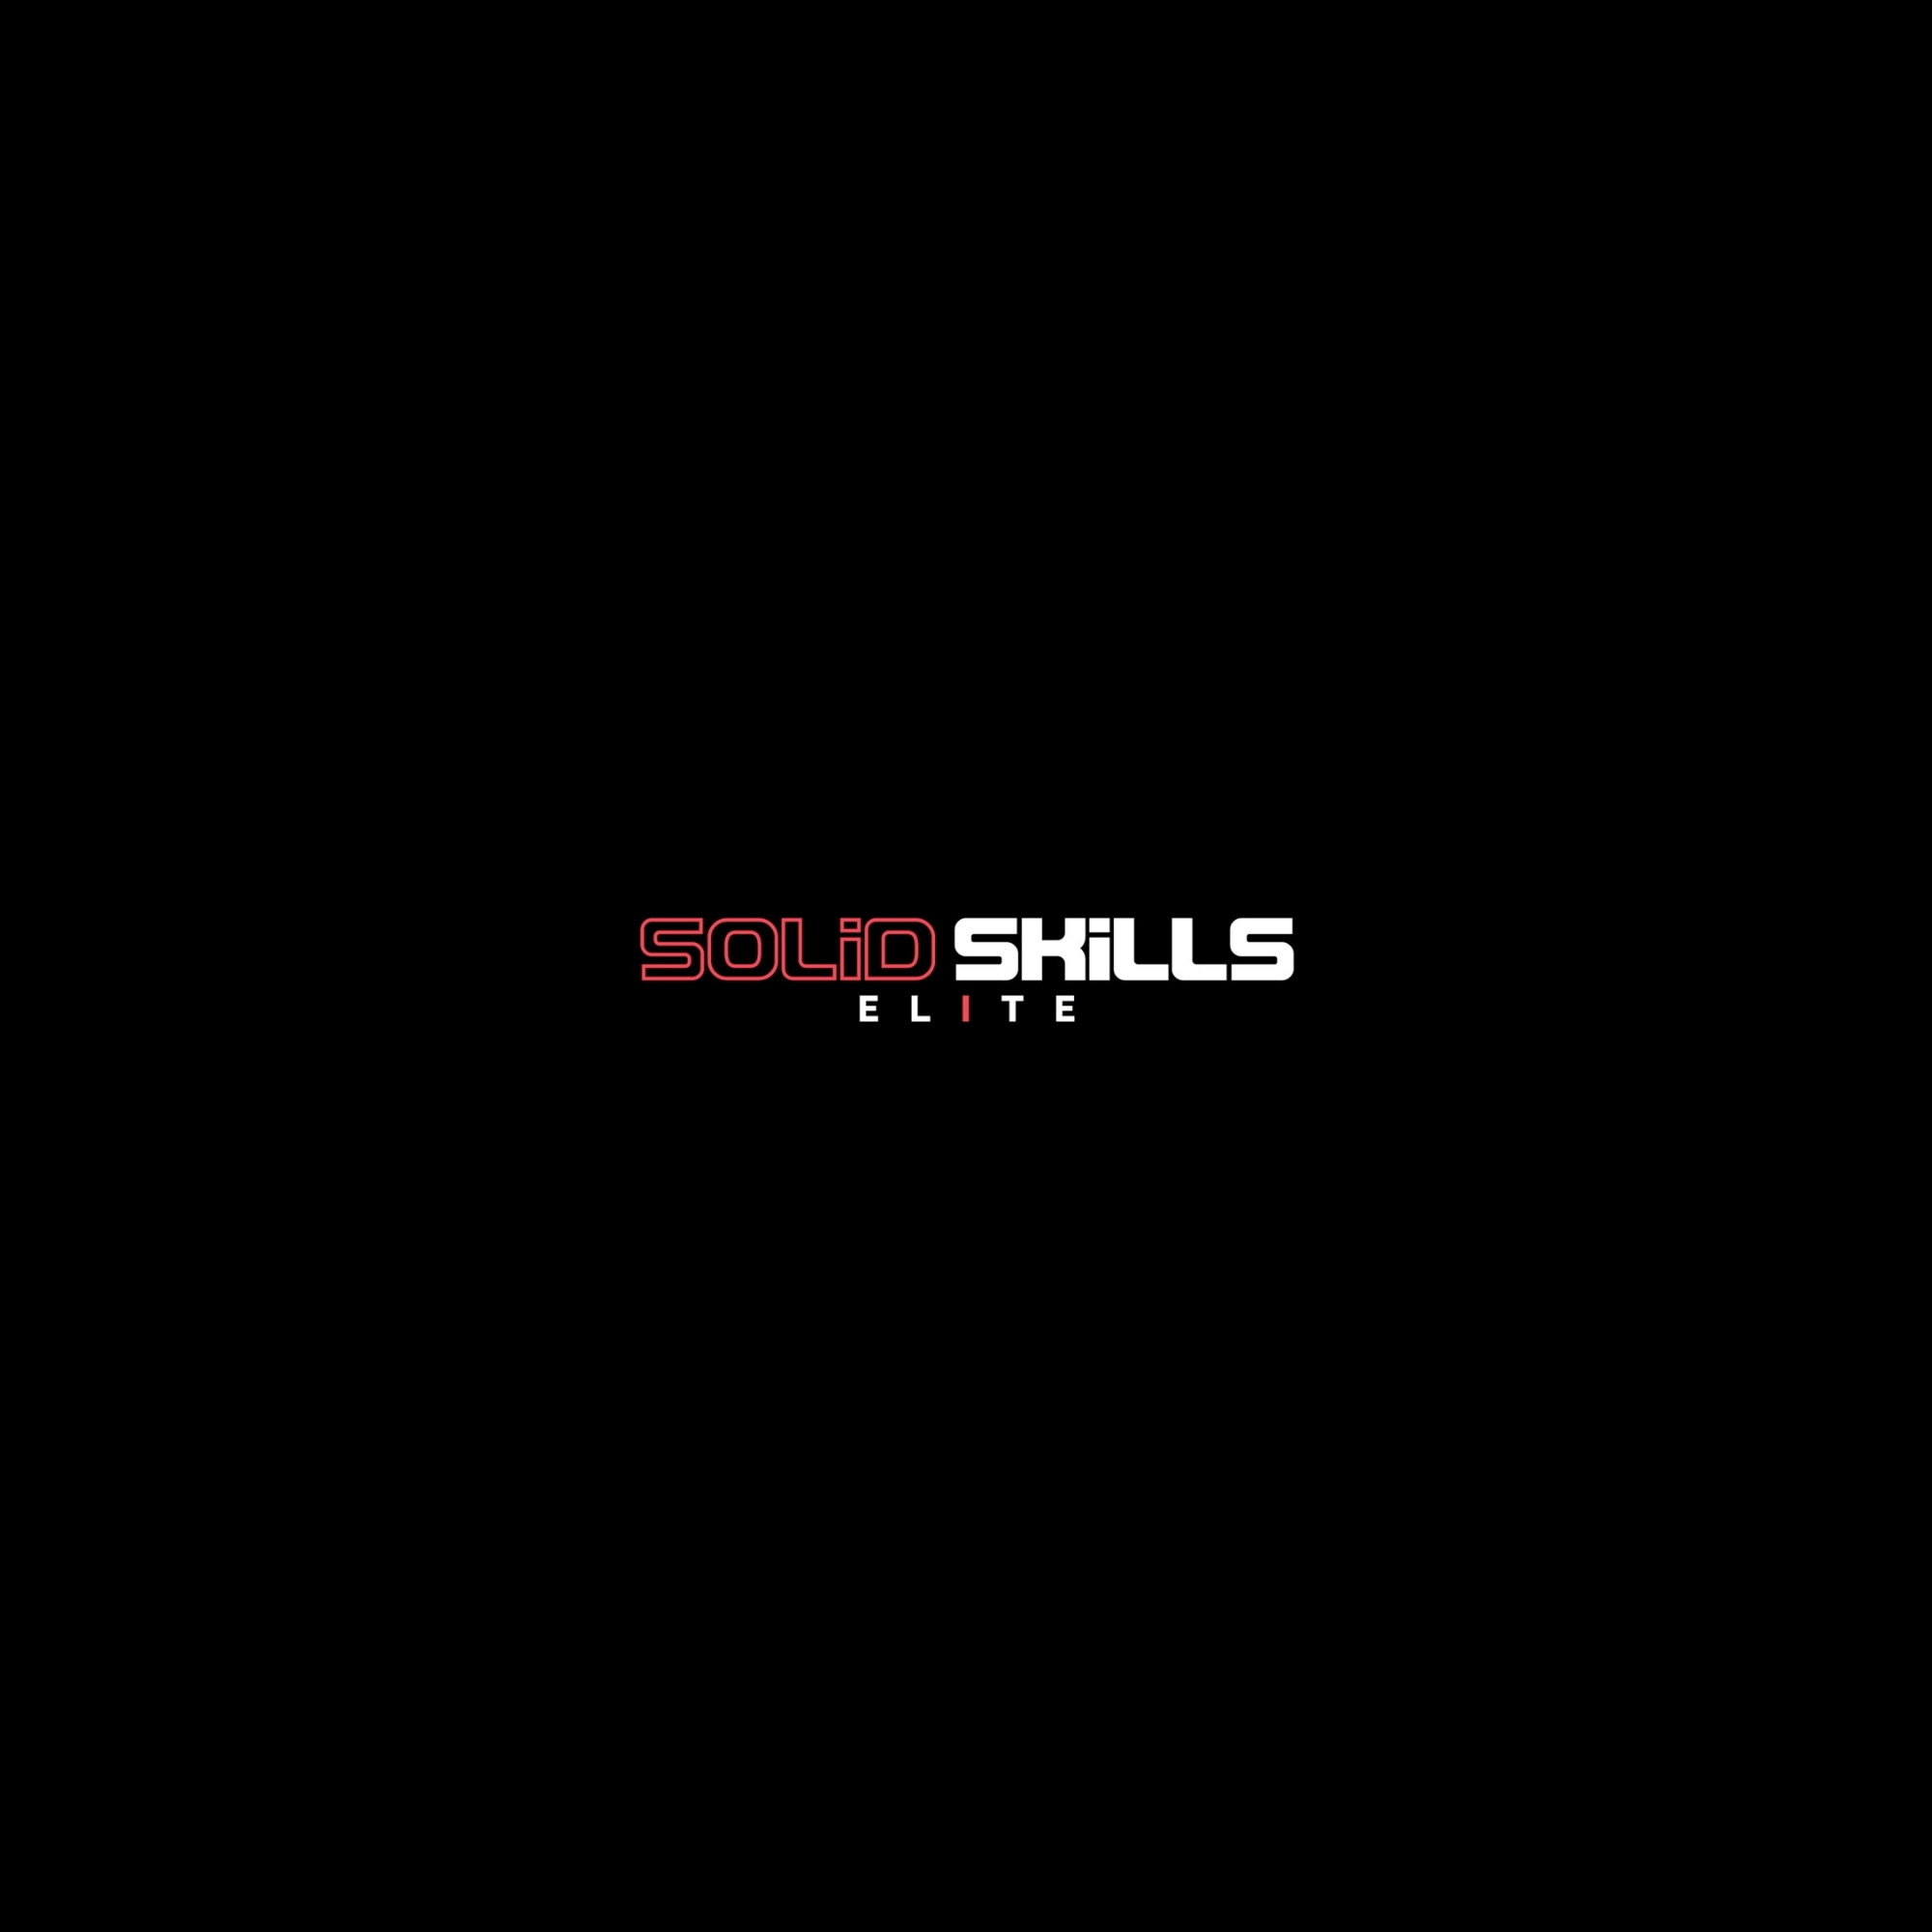 The official logo of SOLiD SKiLLS ELiTE